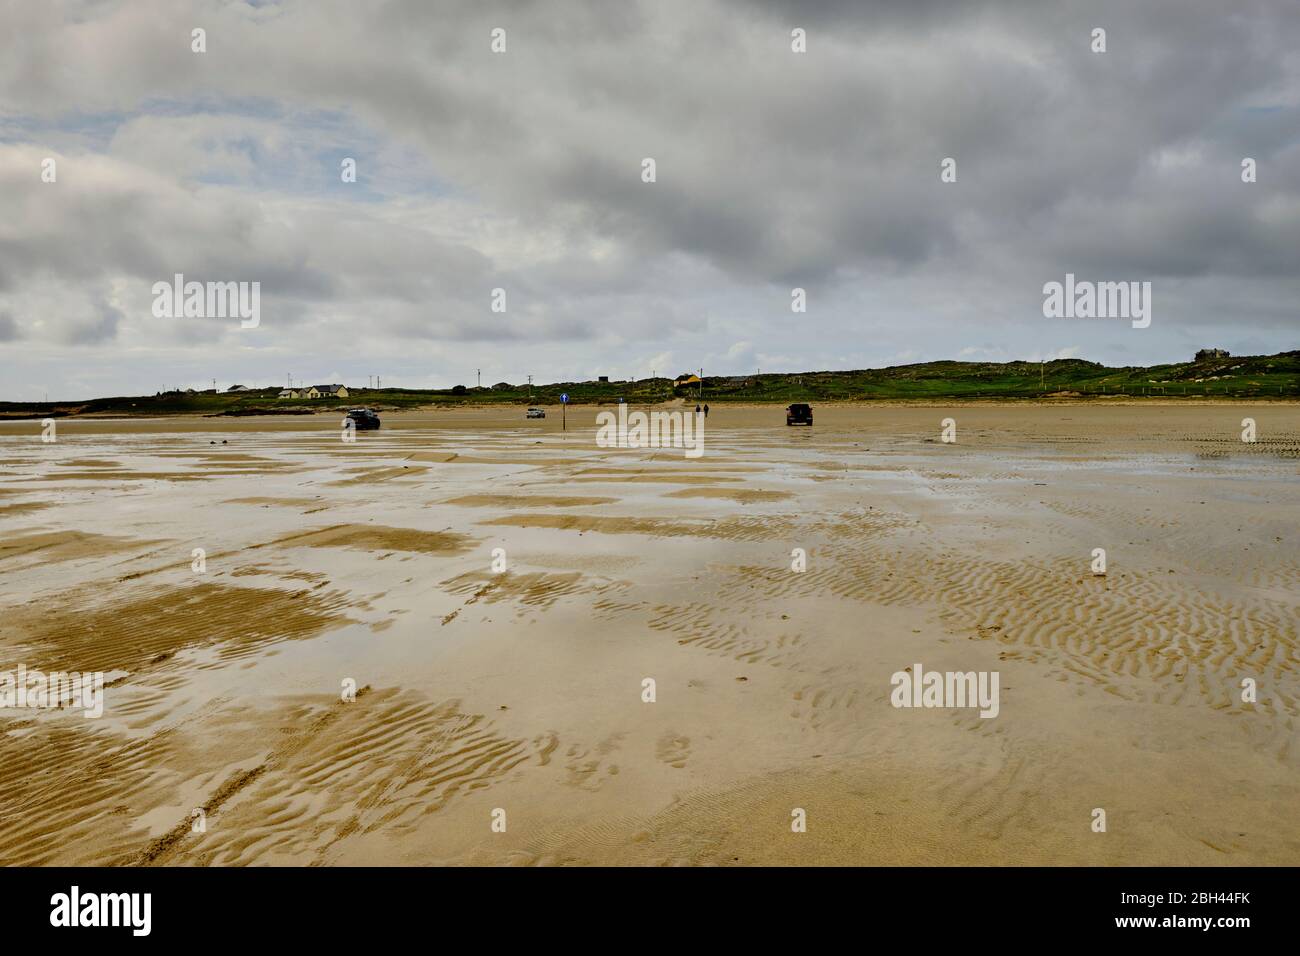 The large sandy strand to reach Omey Island by following the arrowed signs. Omey Island is a tidal island situated near Claddaghduff on the western ed Stock Photo